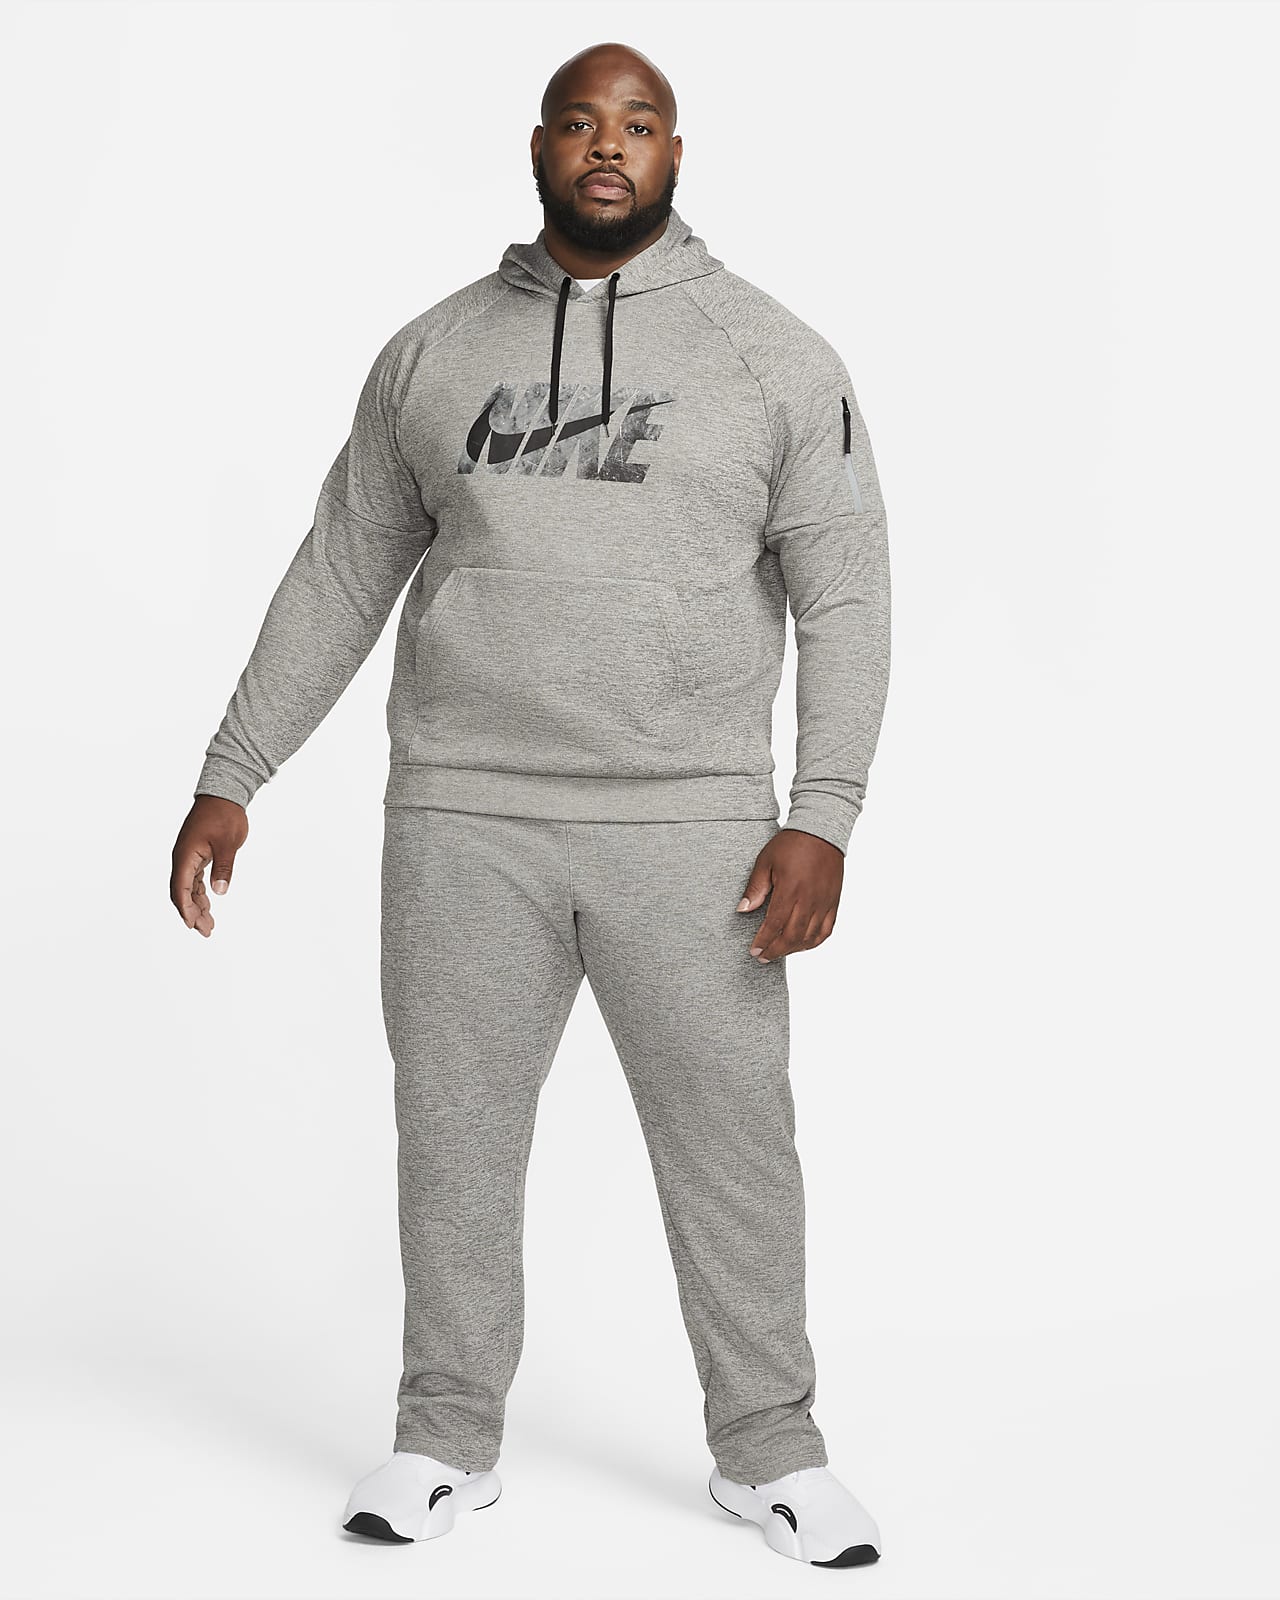 Nike Therma-FIT Men's Pullover Fitness 